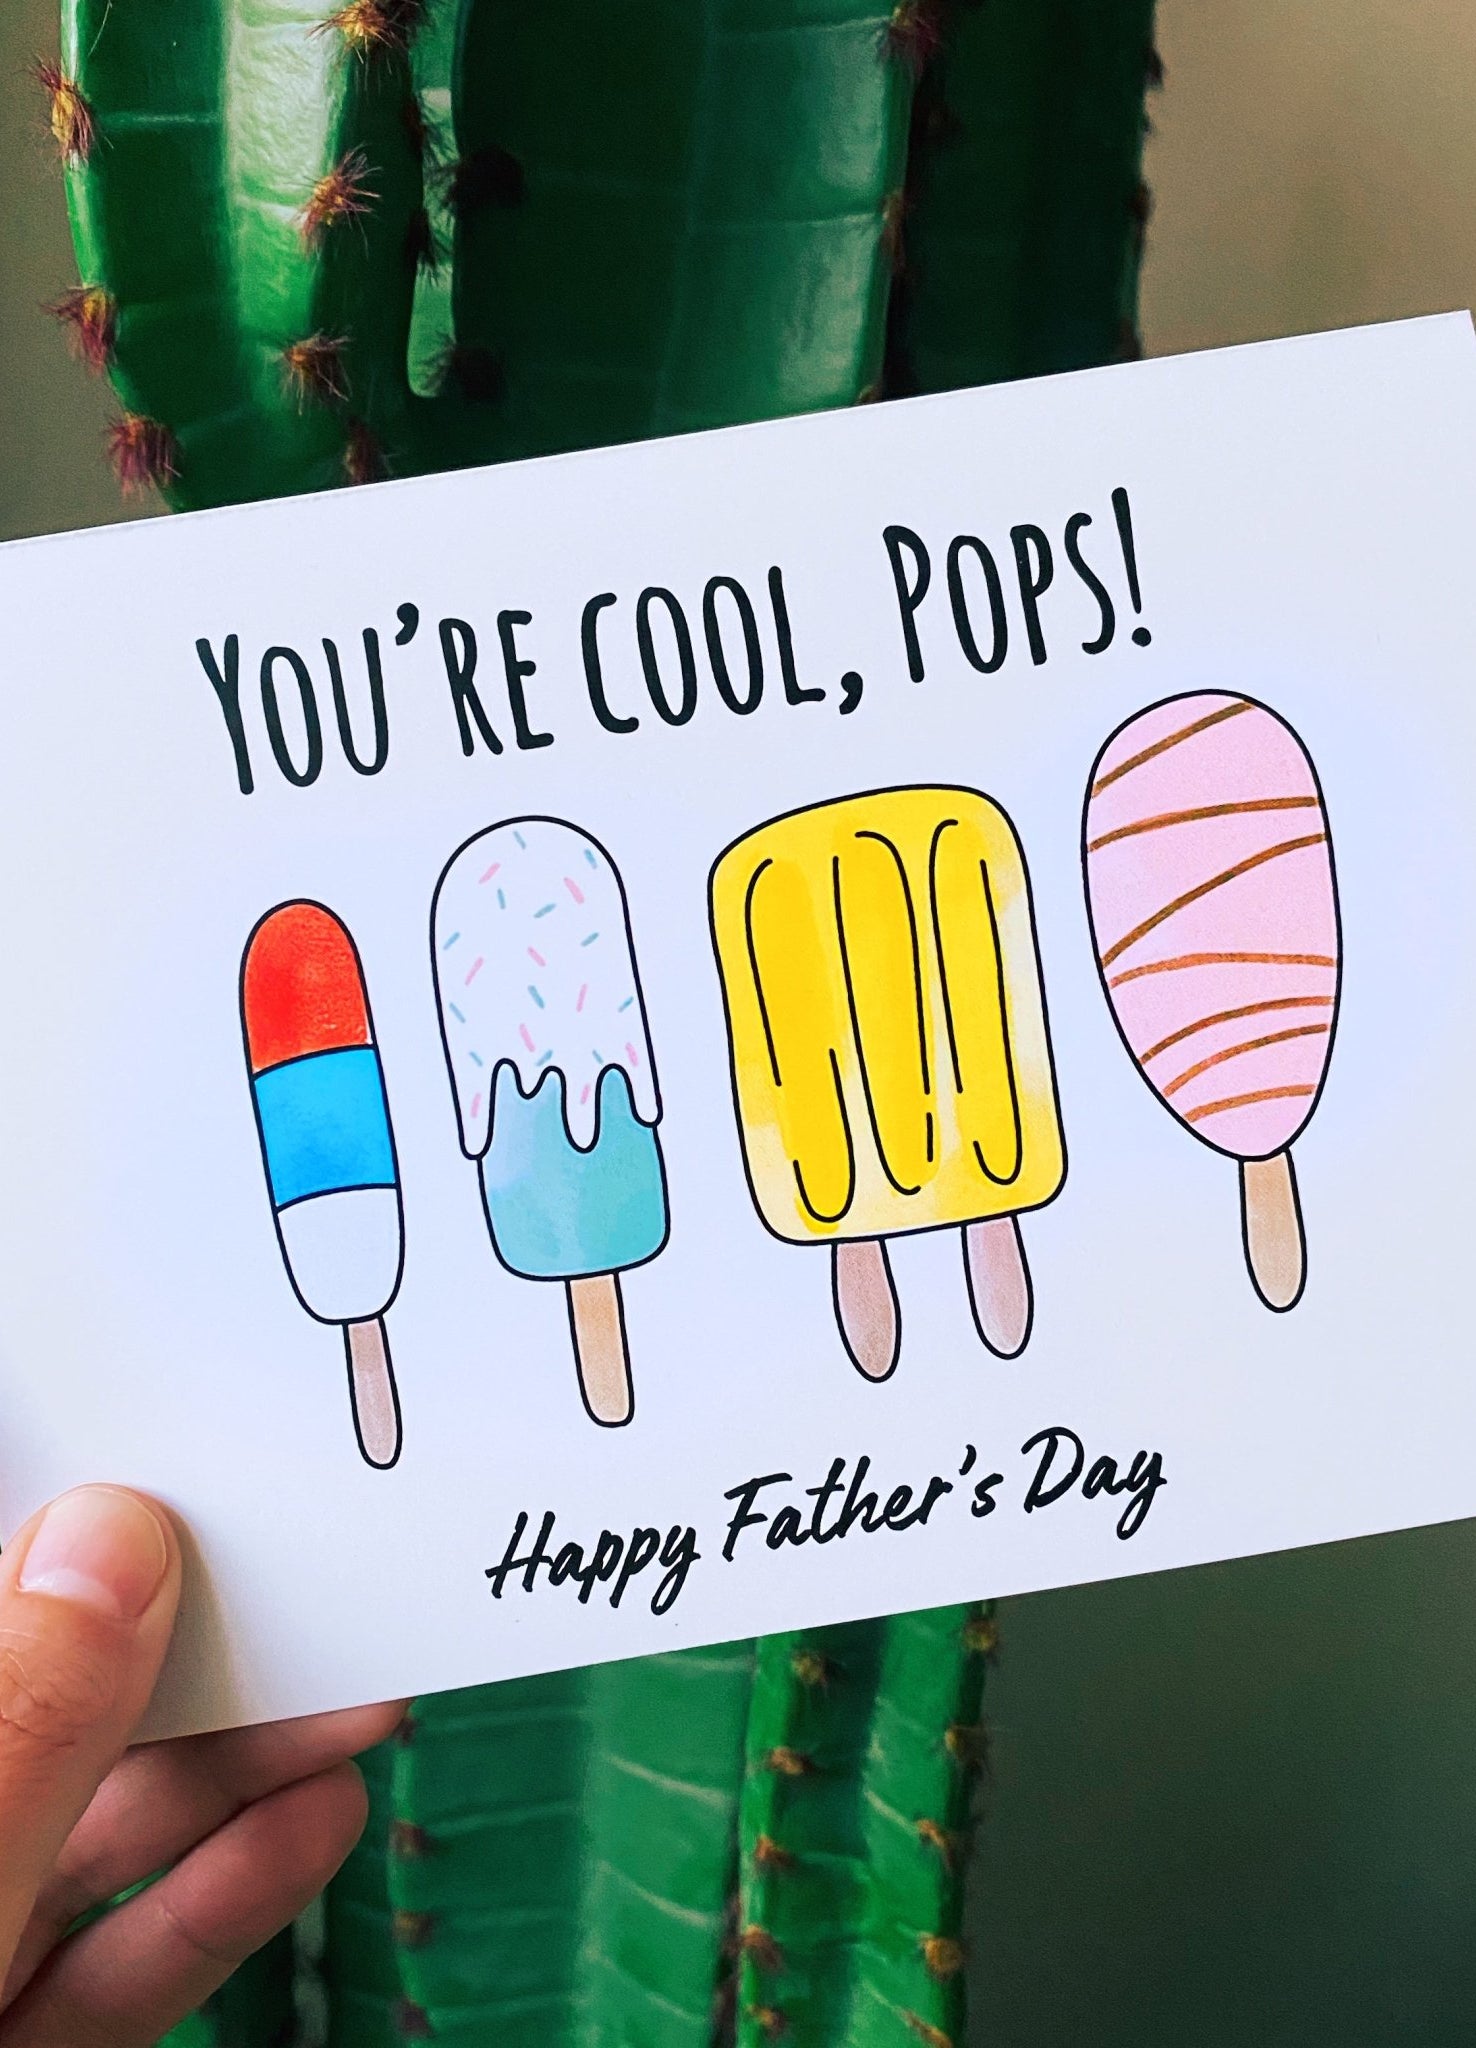 You're Cool Pops Father's Day Card - UntamedEgo LLC.